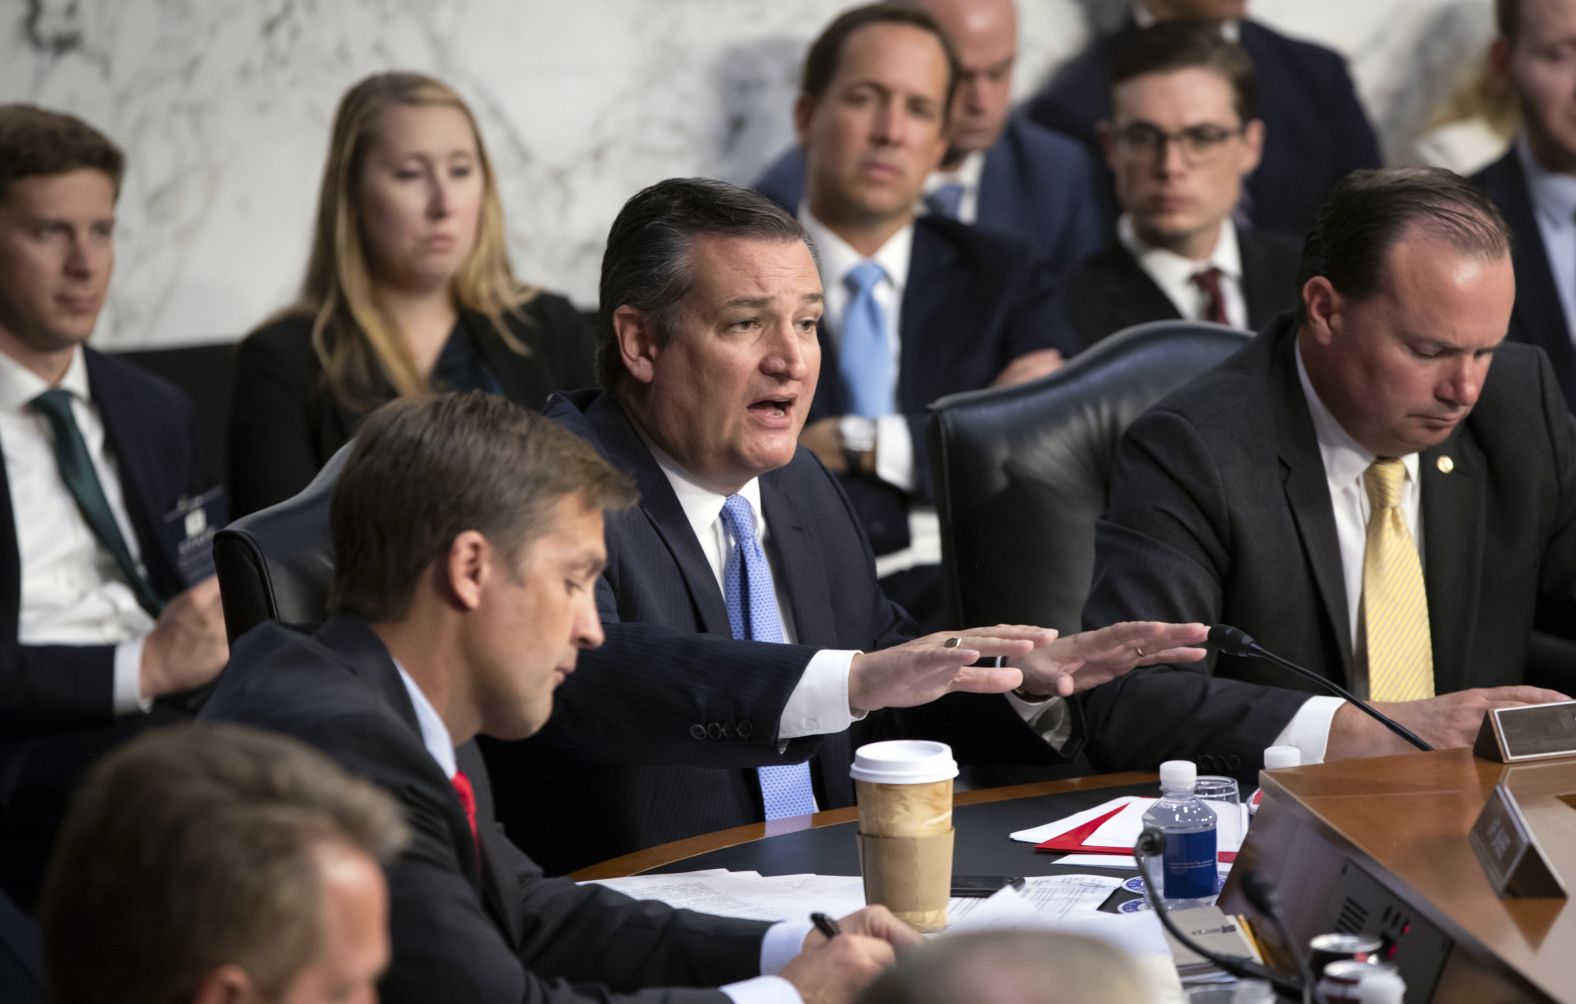 Sen. Ted Cruz makes an opening statement Tuesday. The Texas Republican <a href="index.php?page=&url=https%3A%2F%2Fwww.cnn.com%2Fpolitics%2Flive-news%2Fkavanaugh-hearing-dle%2Fh_99f1d3852645d3f25fd3b69394601210" target="_blank">accused Democrats</a> of opposing Kavanaugh as a means of relitigating the 2016 presidential election.